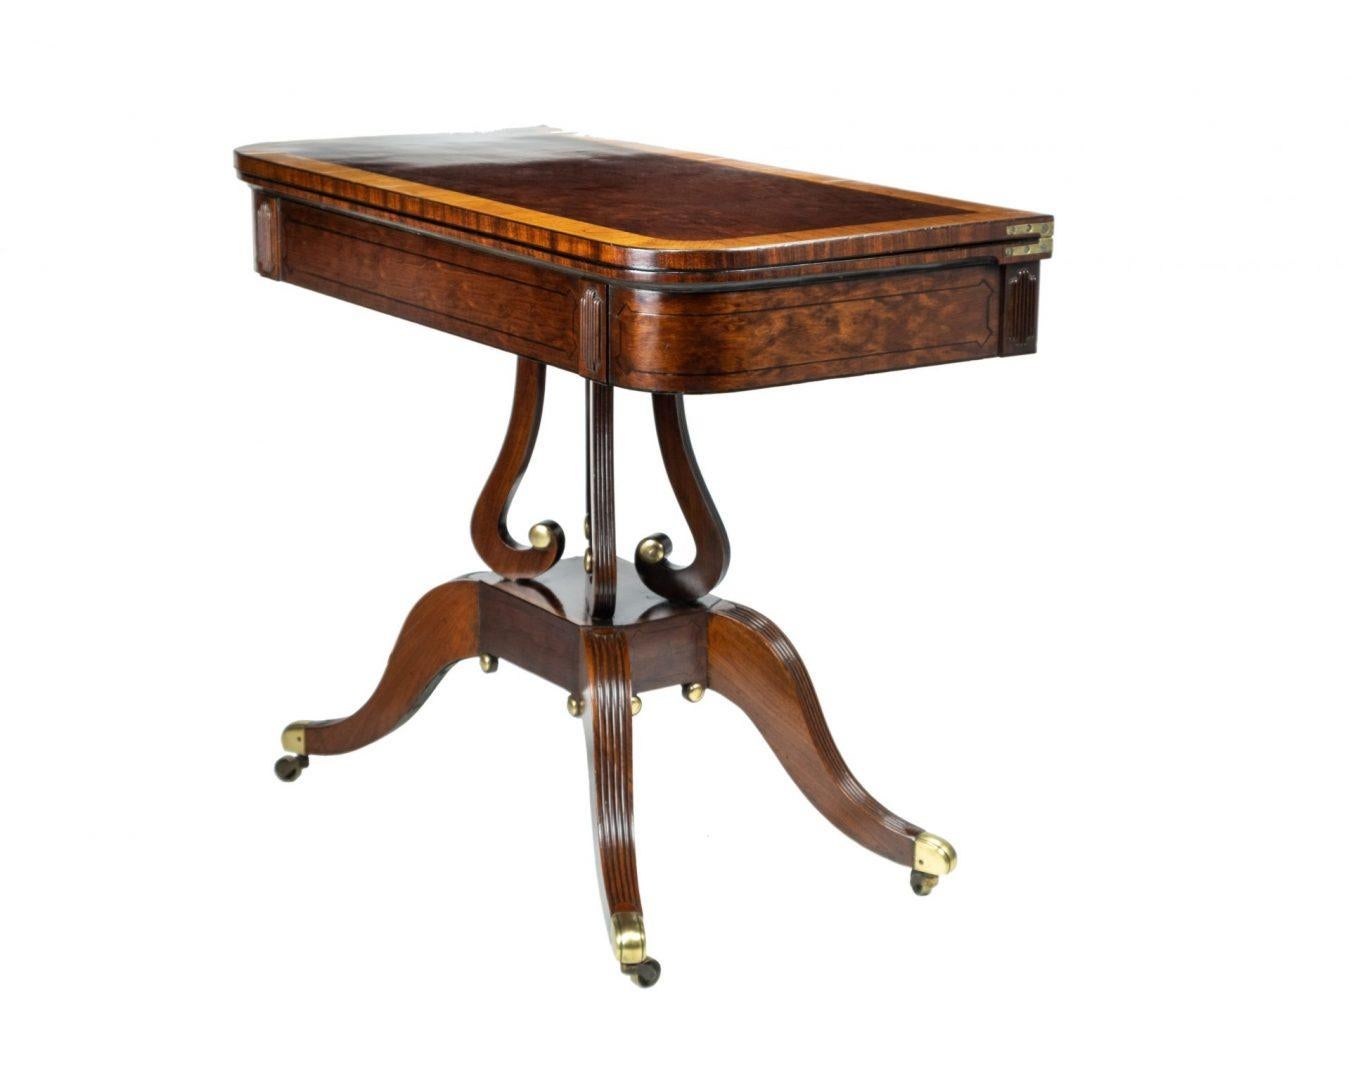 A Regency mahogany Empire style fold over tea table, circa 1815, attributed to Thomas Hope, ebony strung and brass-mounted, the four splayed legs supporting four angled lyre scroll and reeded columns, the swivel top opening to reveal plumb pudding